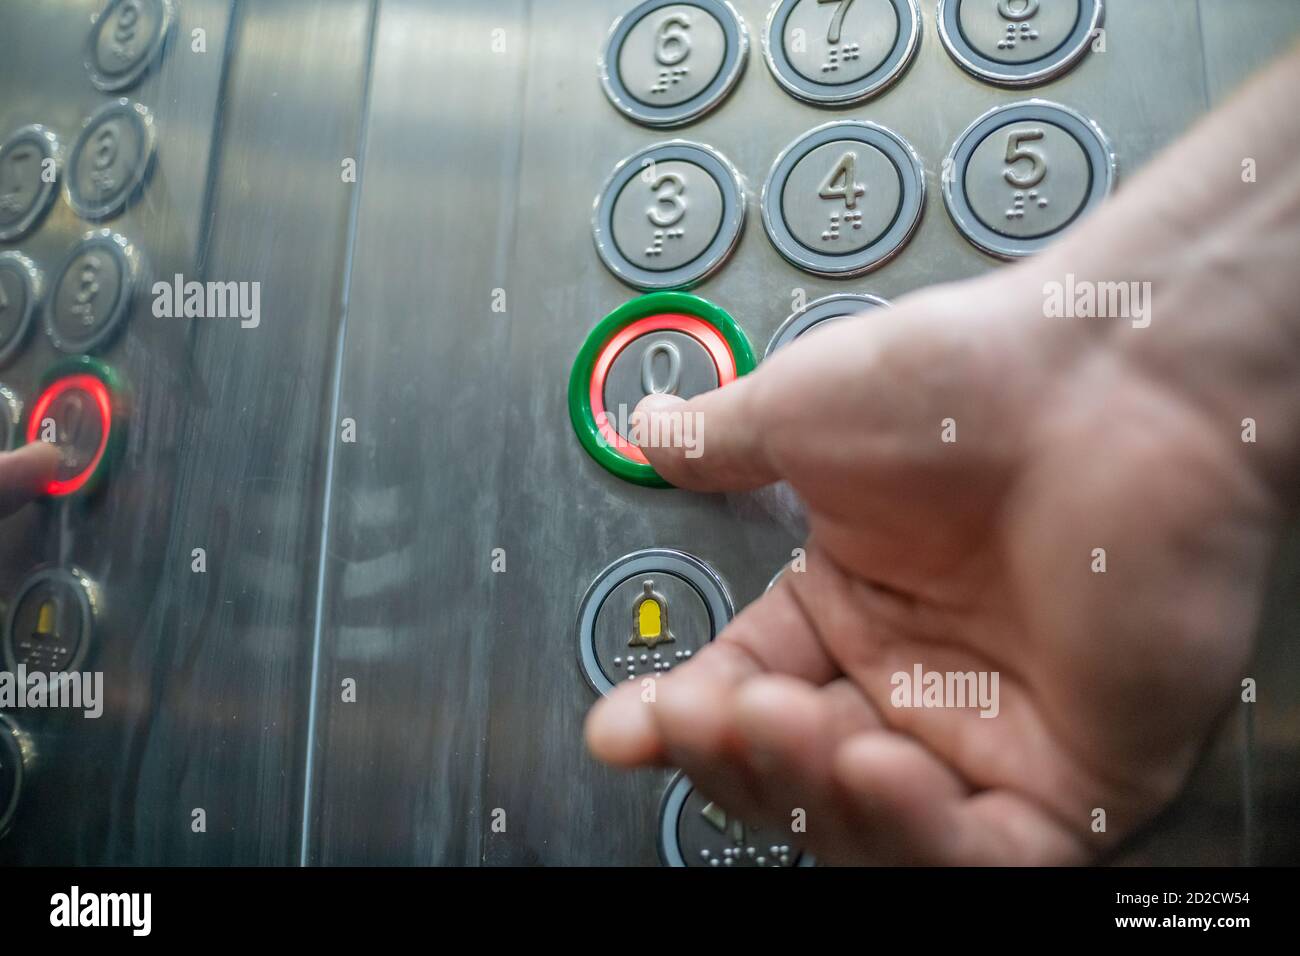 The thumb presses the button in the elevator zero floor close-up. The elevator buttons are signed in braille. The concept of inclusion. Stock Photo